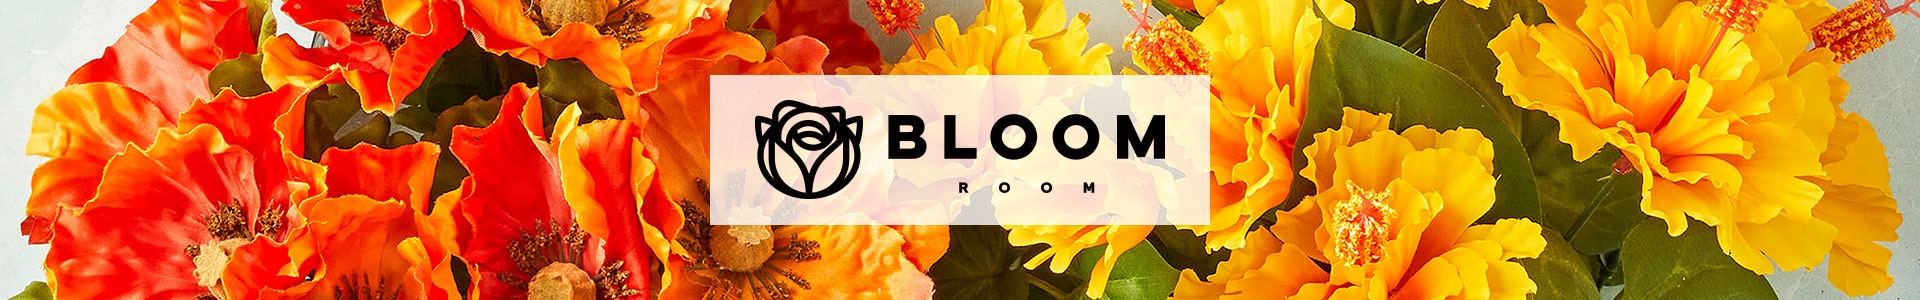 bloom room logo with flowers